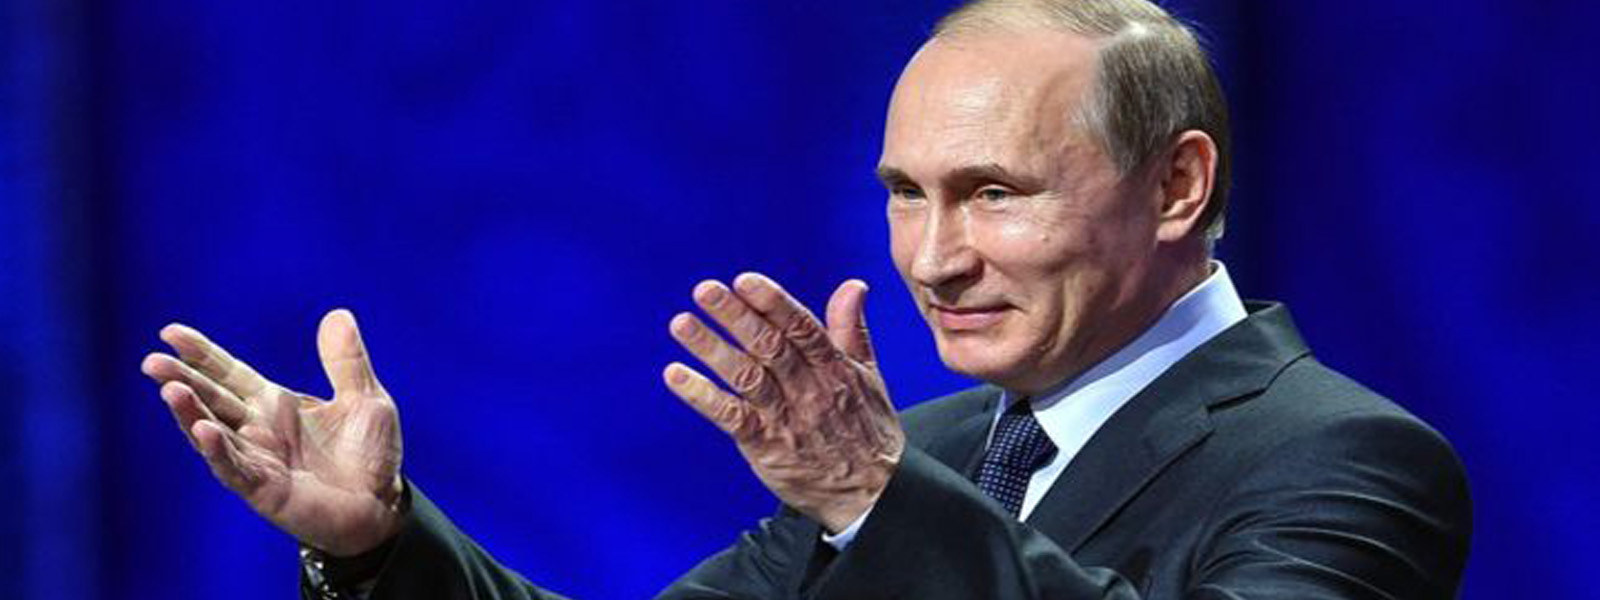 Putin wins presidential election for fourth term